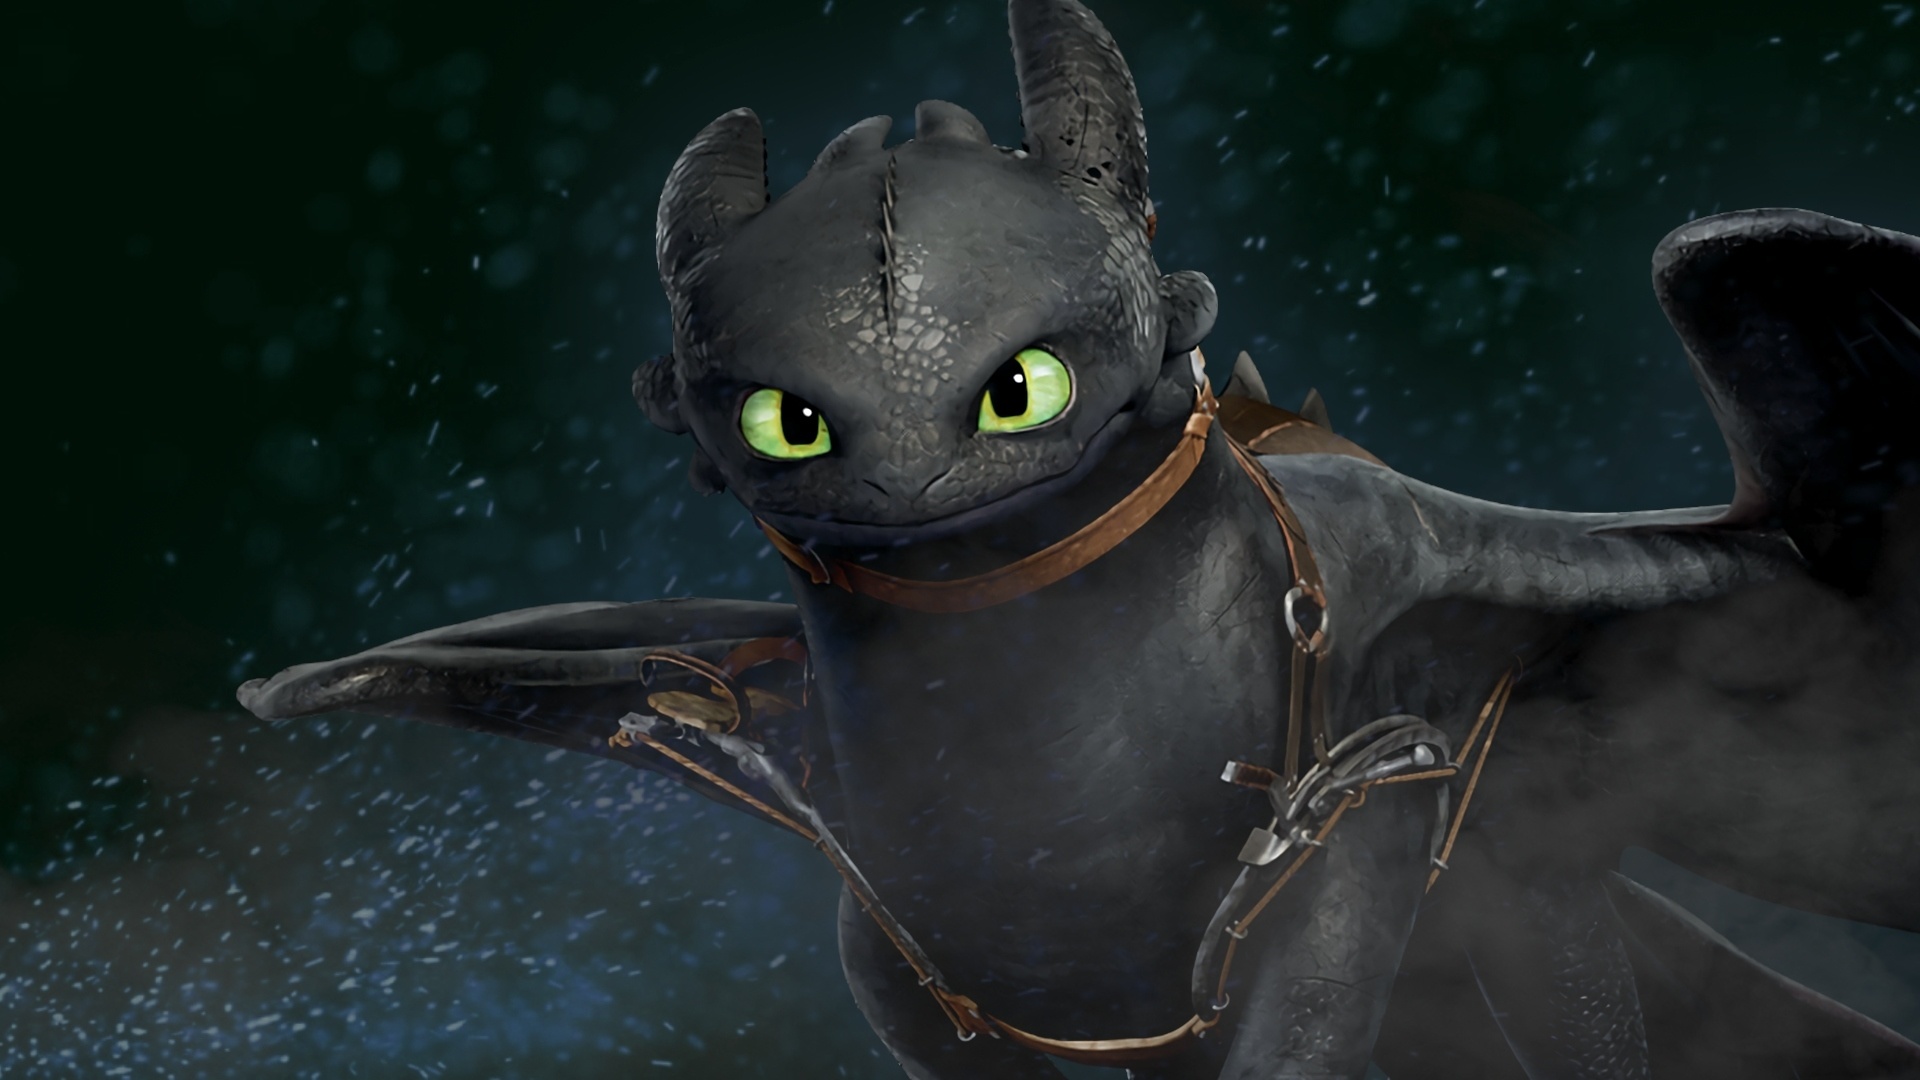 Dragon, toothless, how to train your dragon animated movie wallpaper, HD image, picture, background, dfe2d1